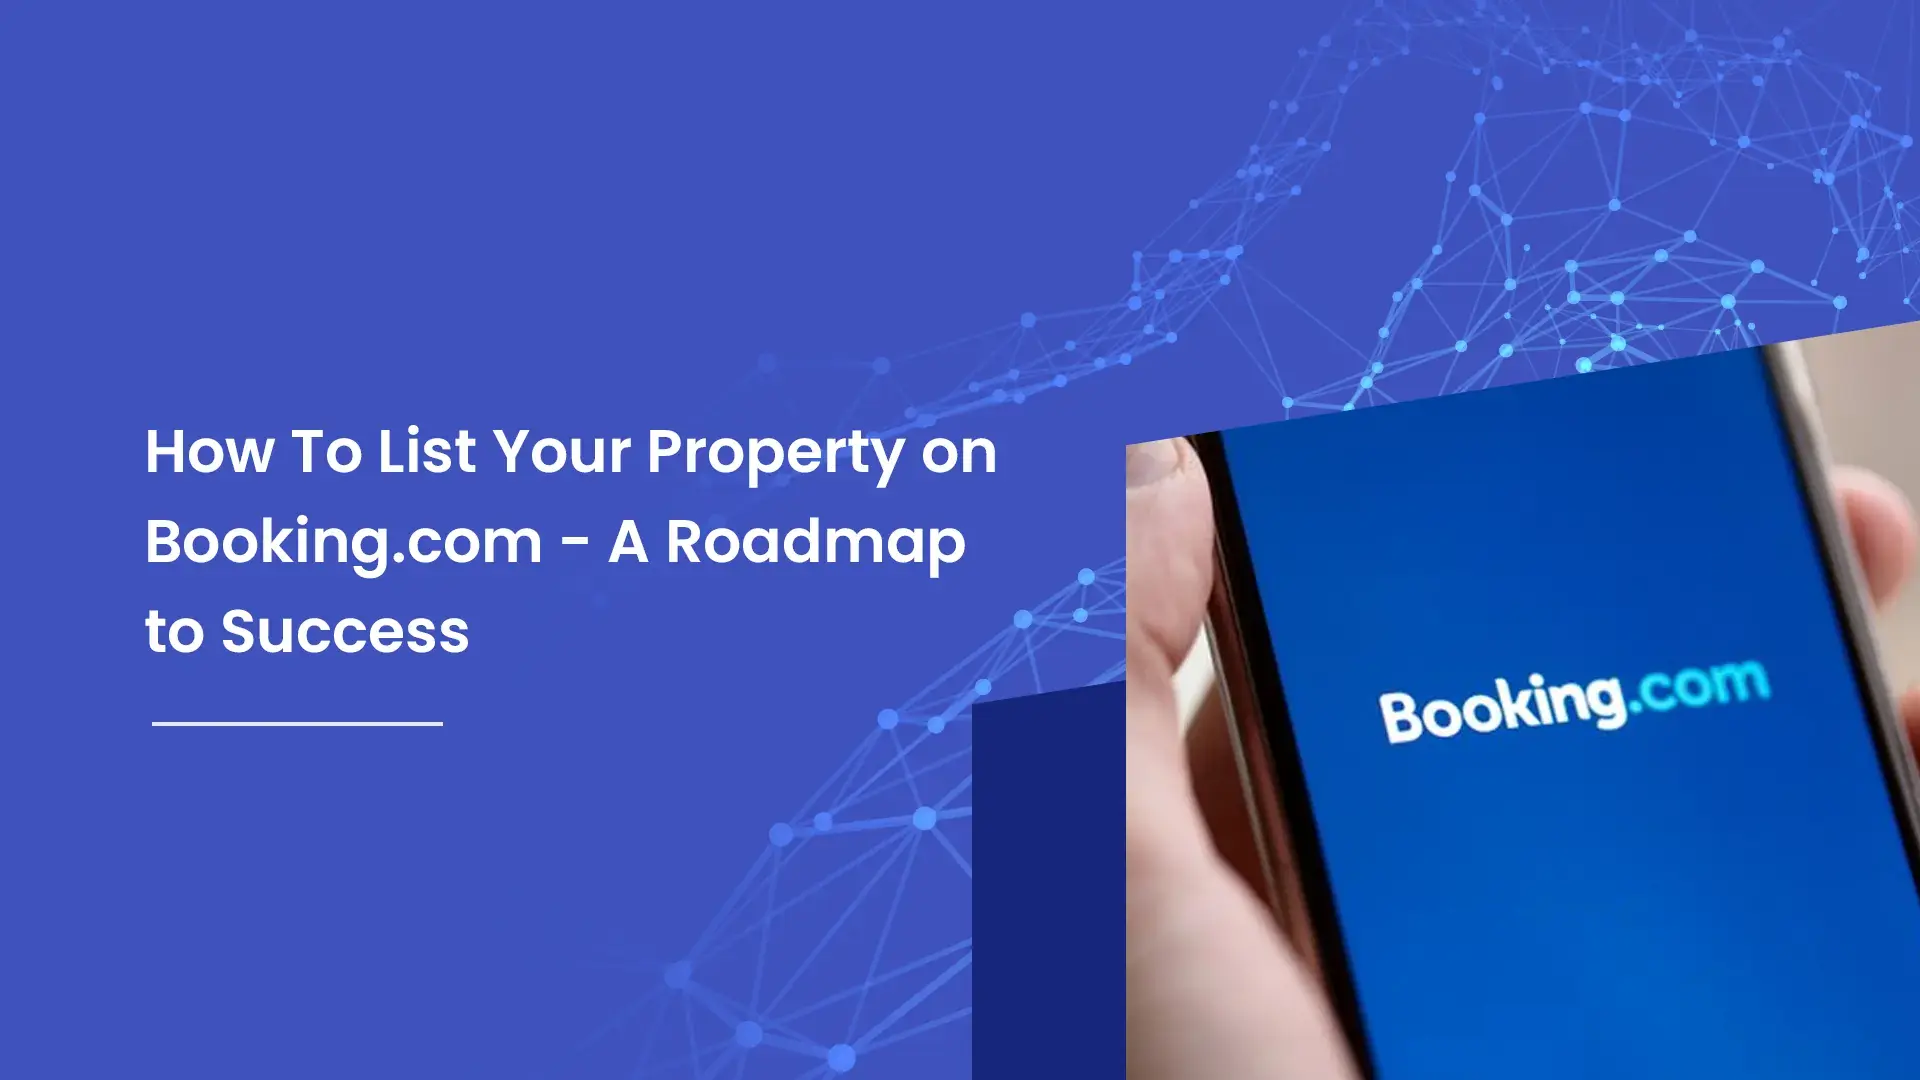 how to list property on booking.com